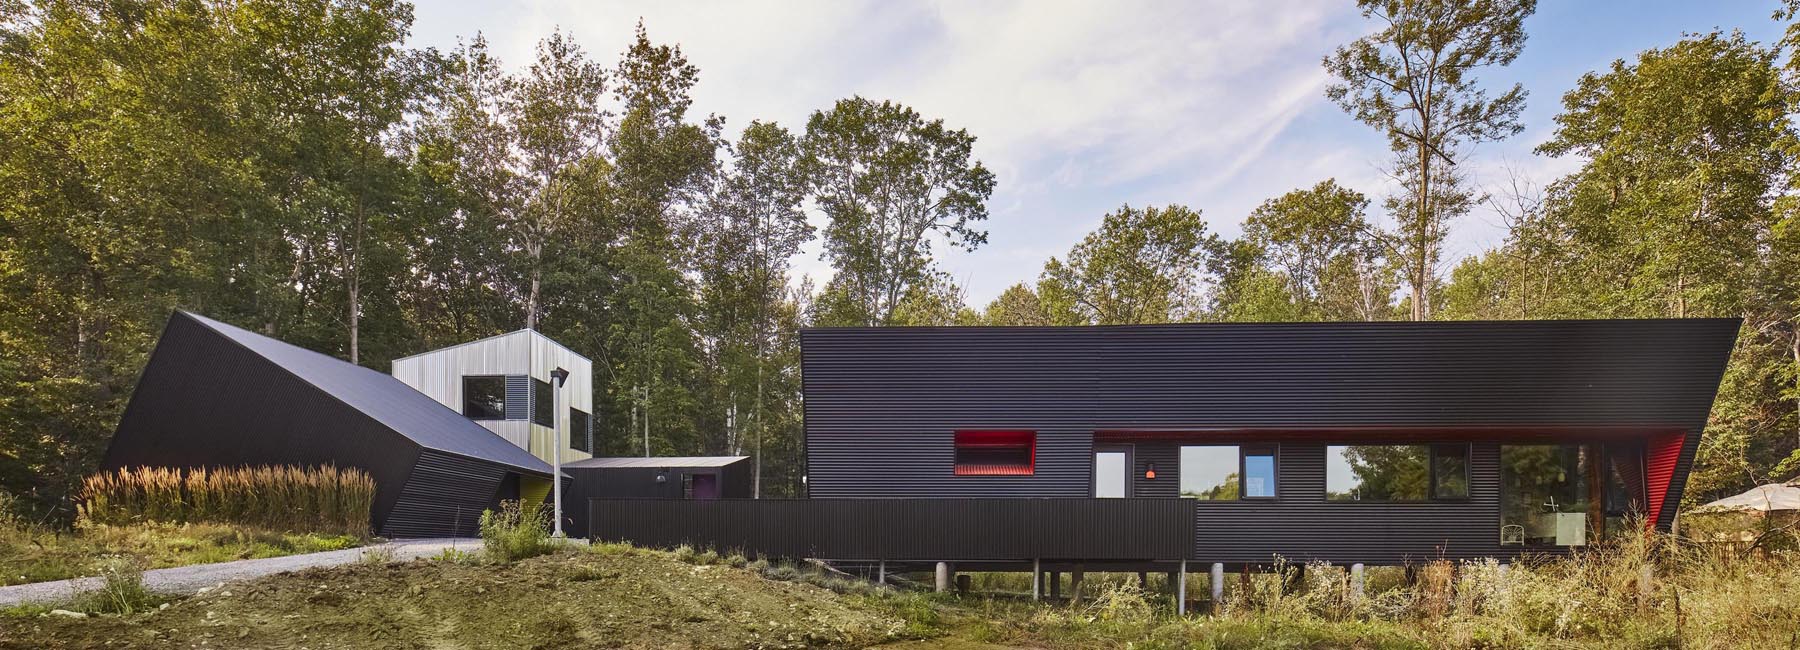 thier + curran architects' retirement dwelling in ontario is clad in black corrugated metal